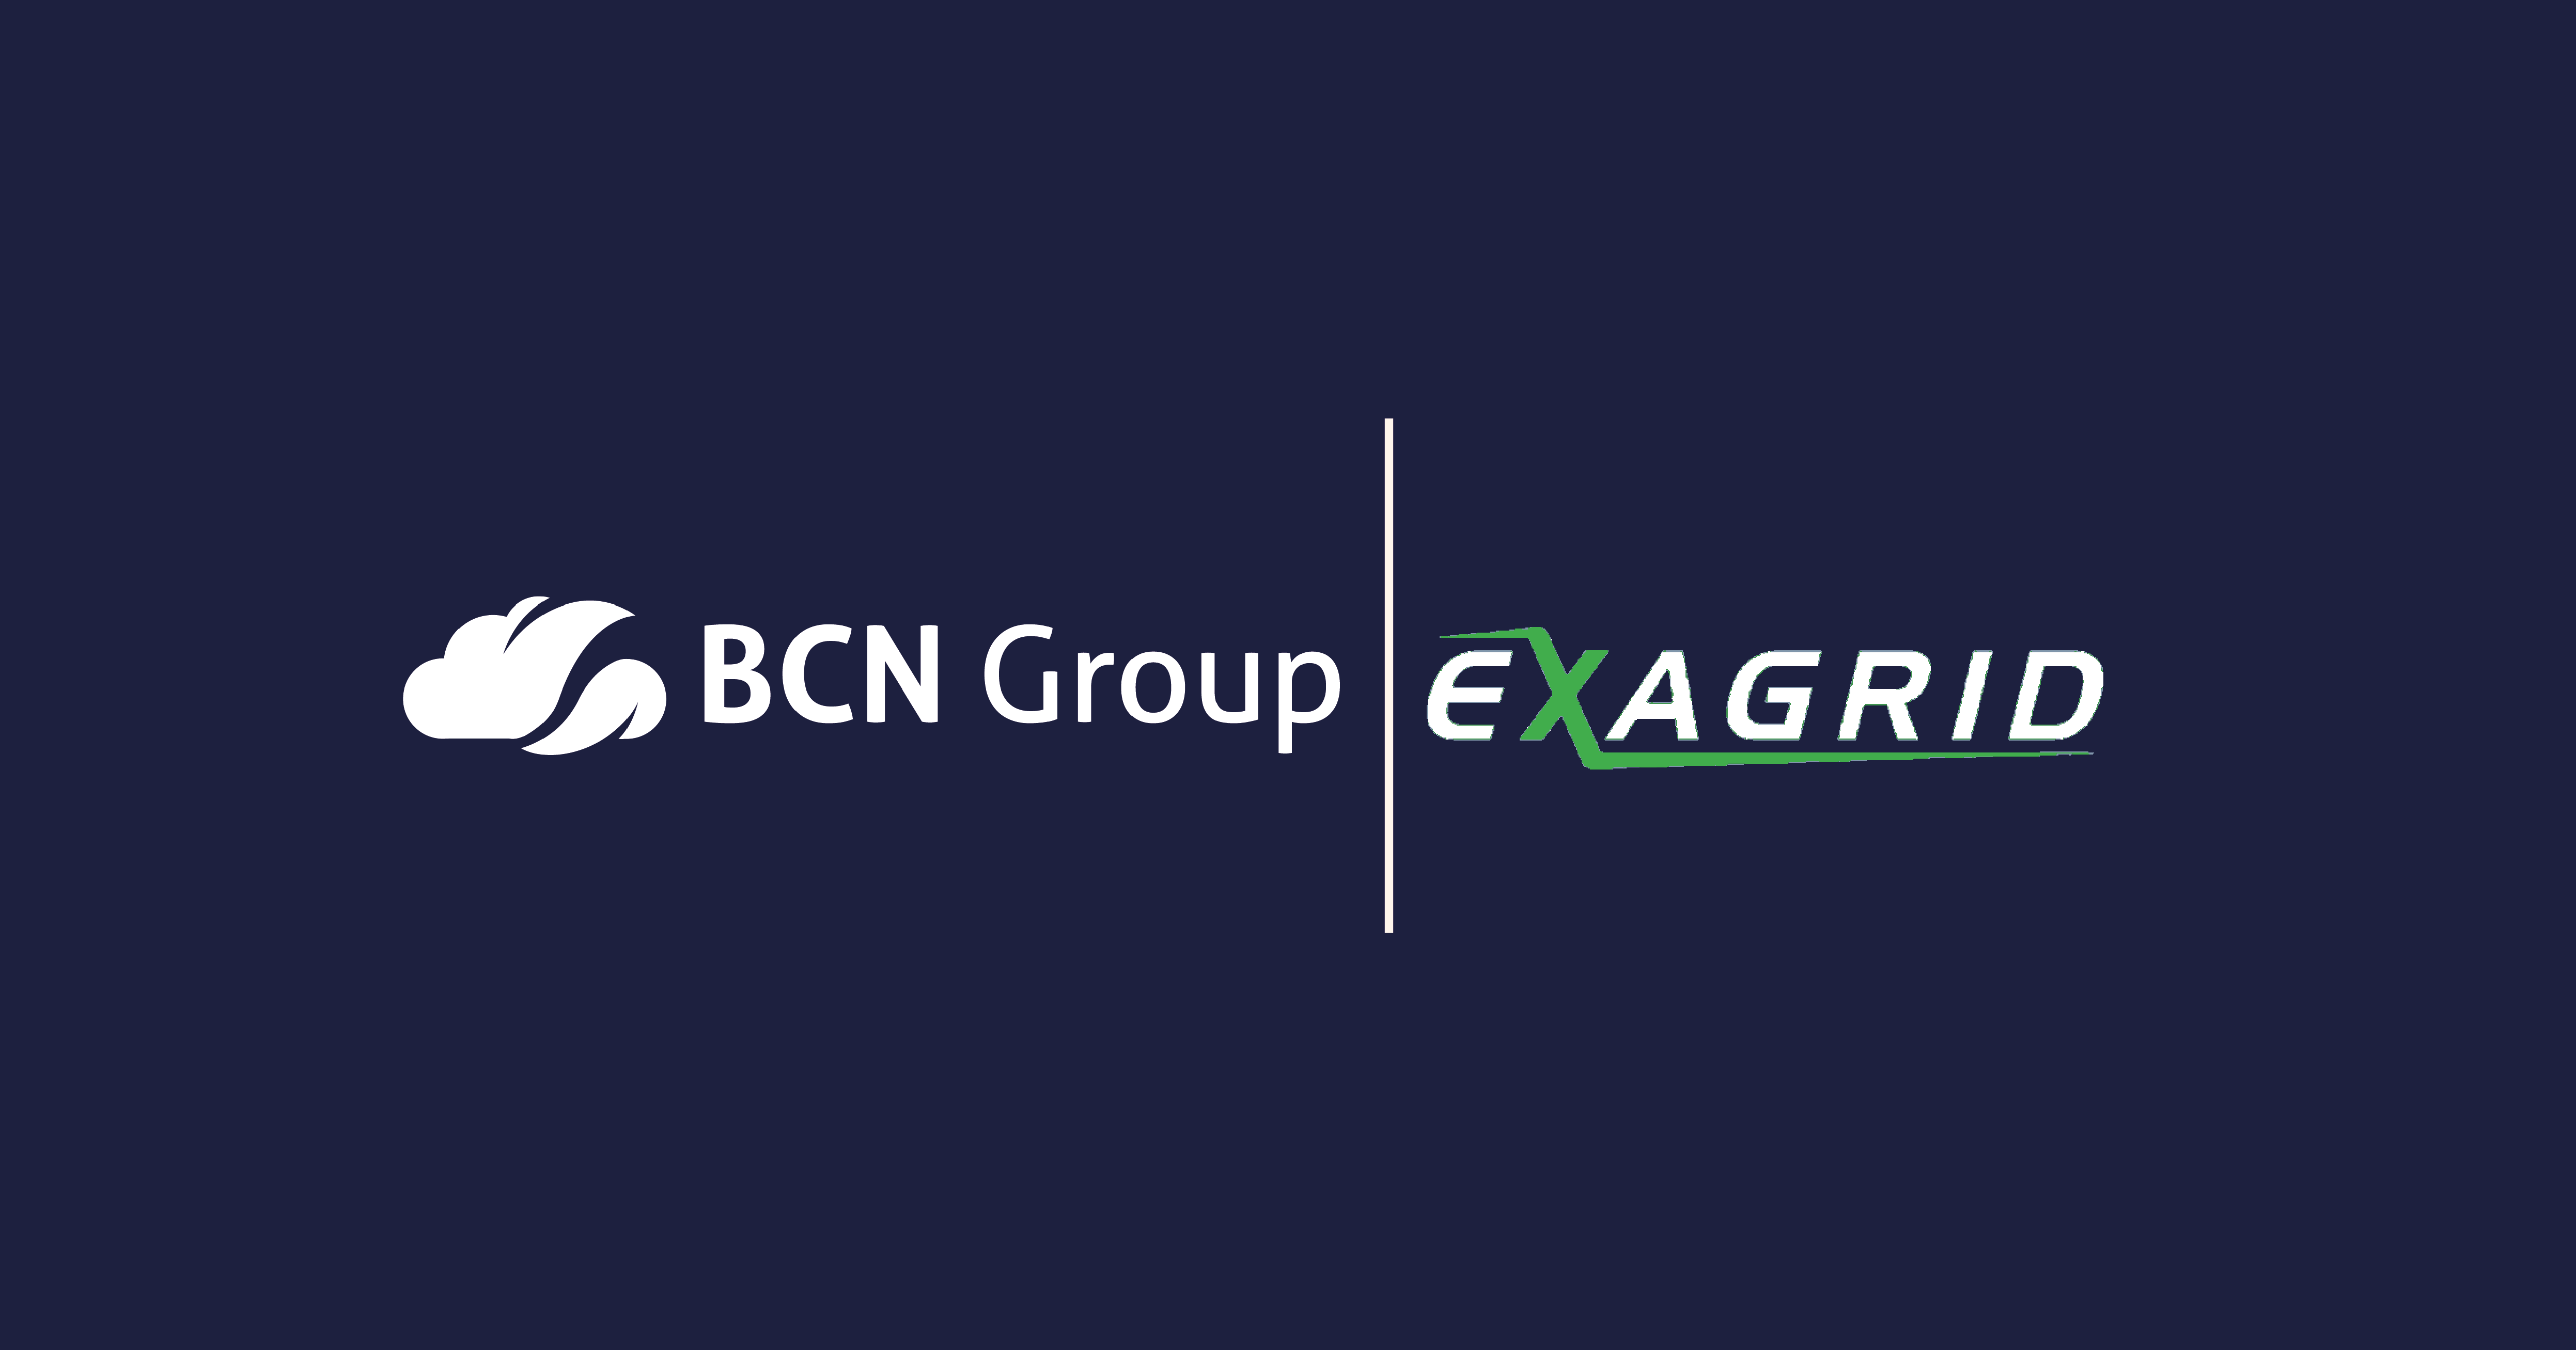 BCN Group partners with ExaGrid to strengthen backup offering